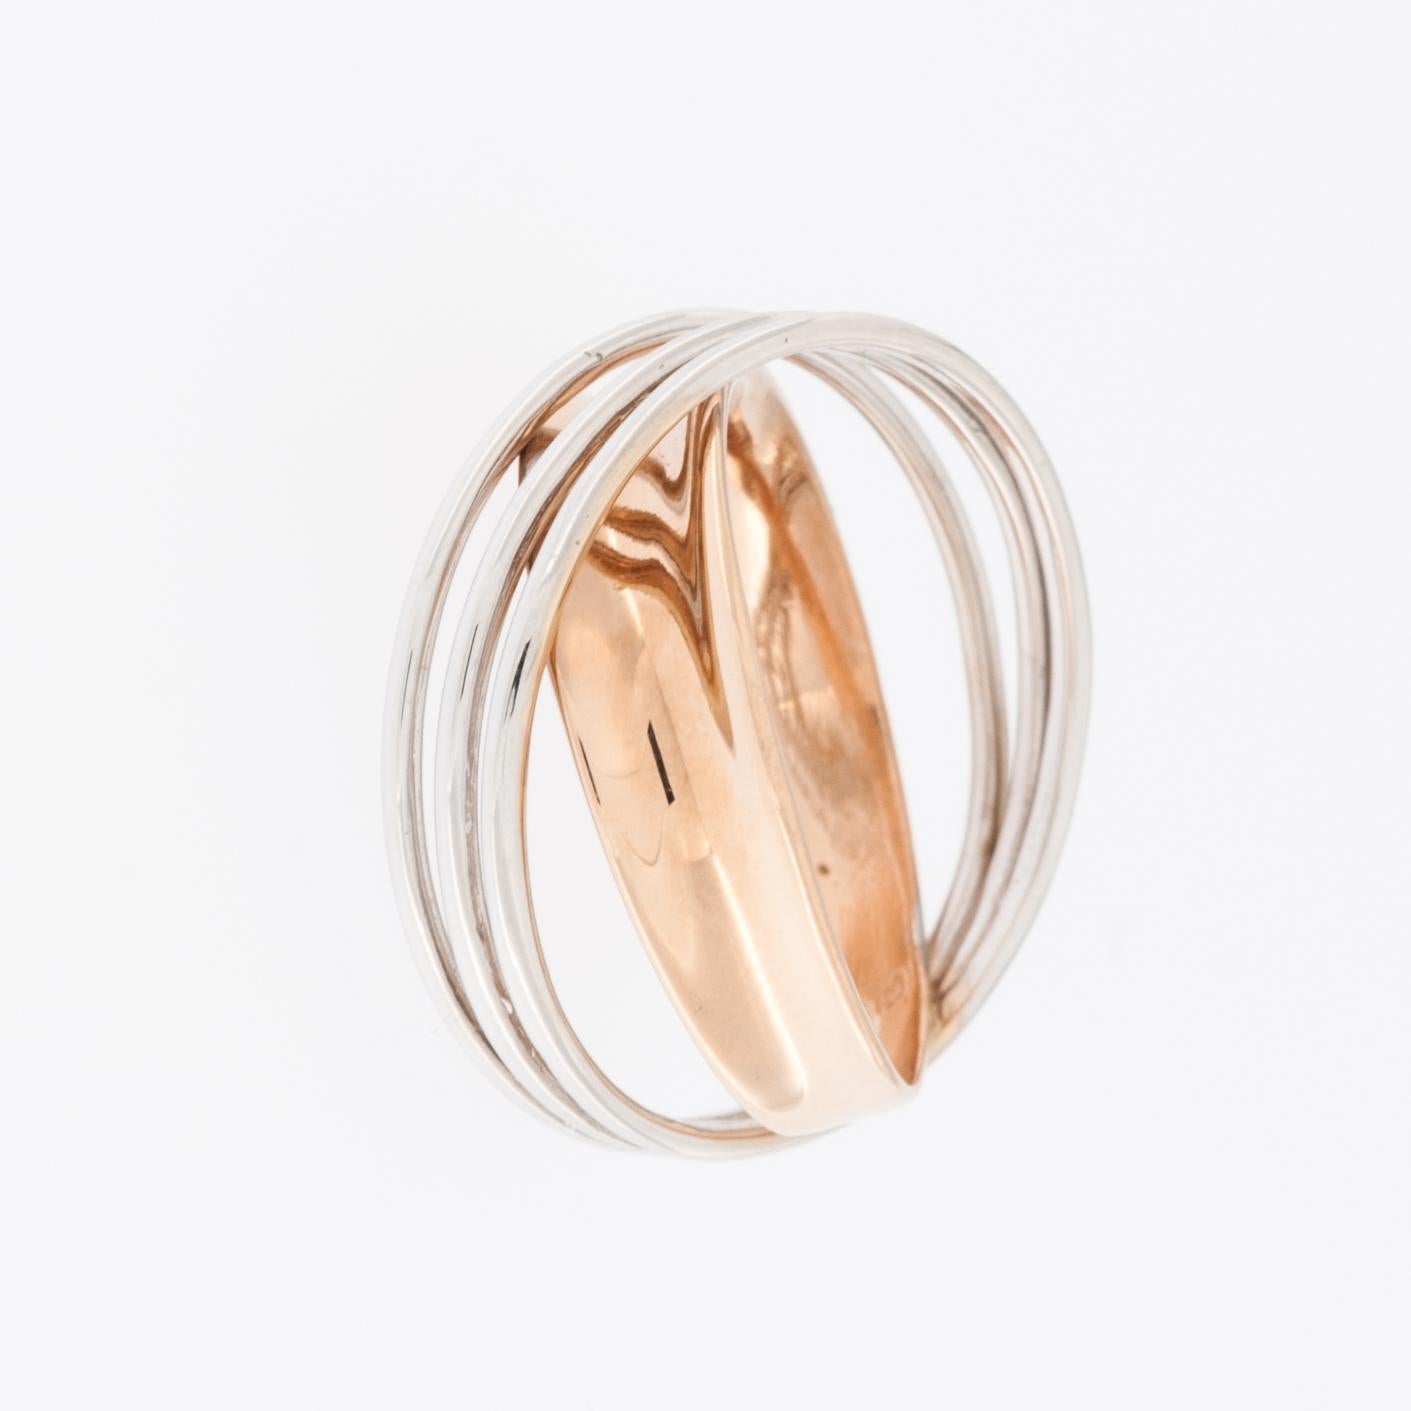 Italian Modern 18kt White and Rose Gold Ring In Good Condition For Sale In Esch-Sur-Alzette, LU